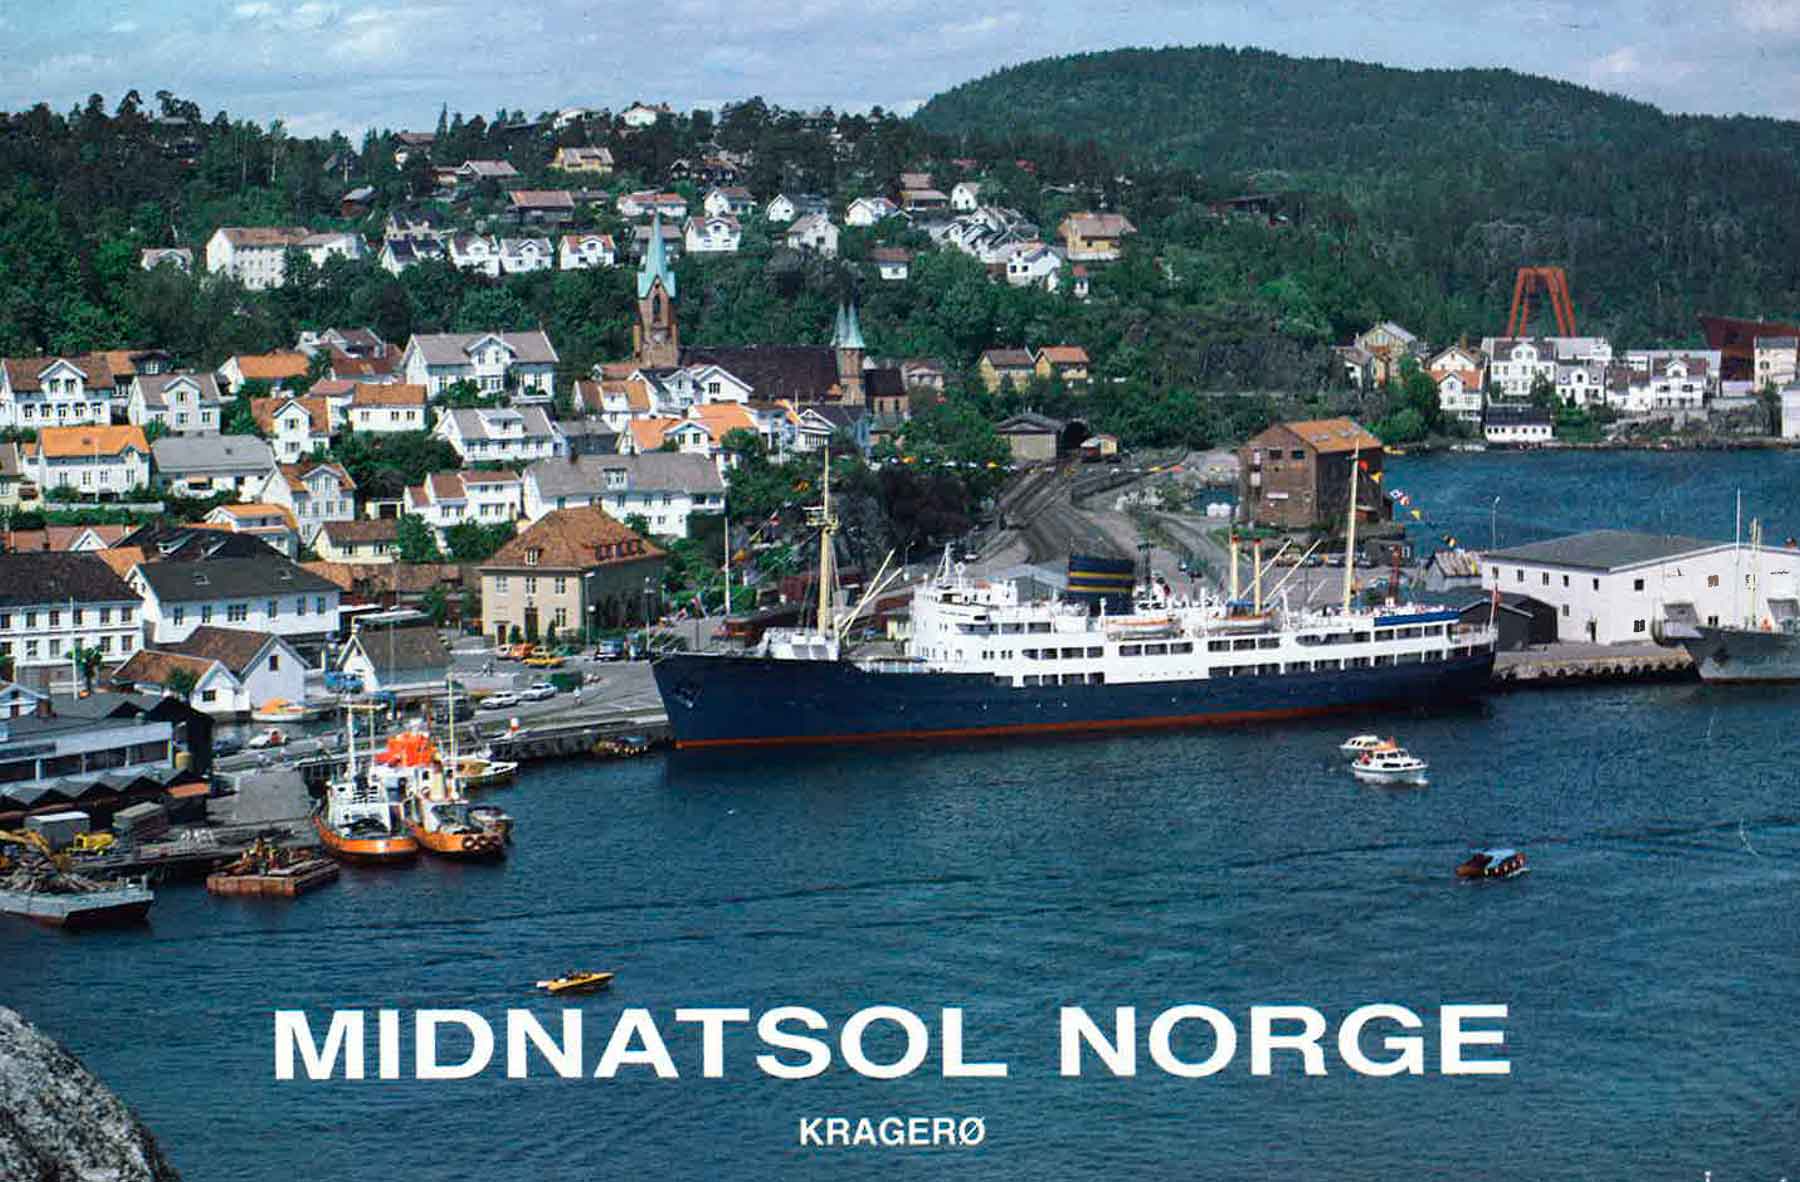 Midnatsol Norge i Kragerø